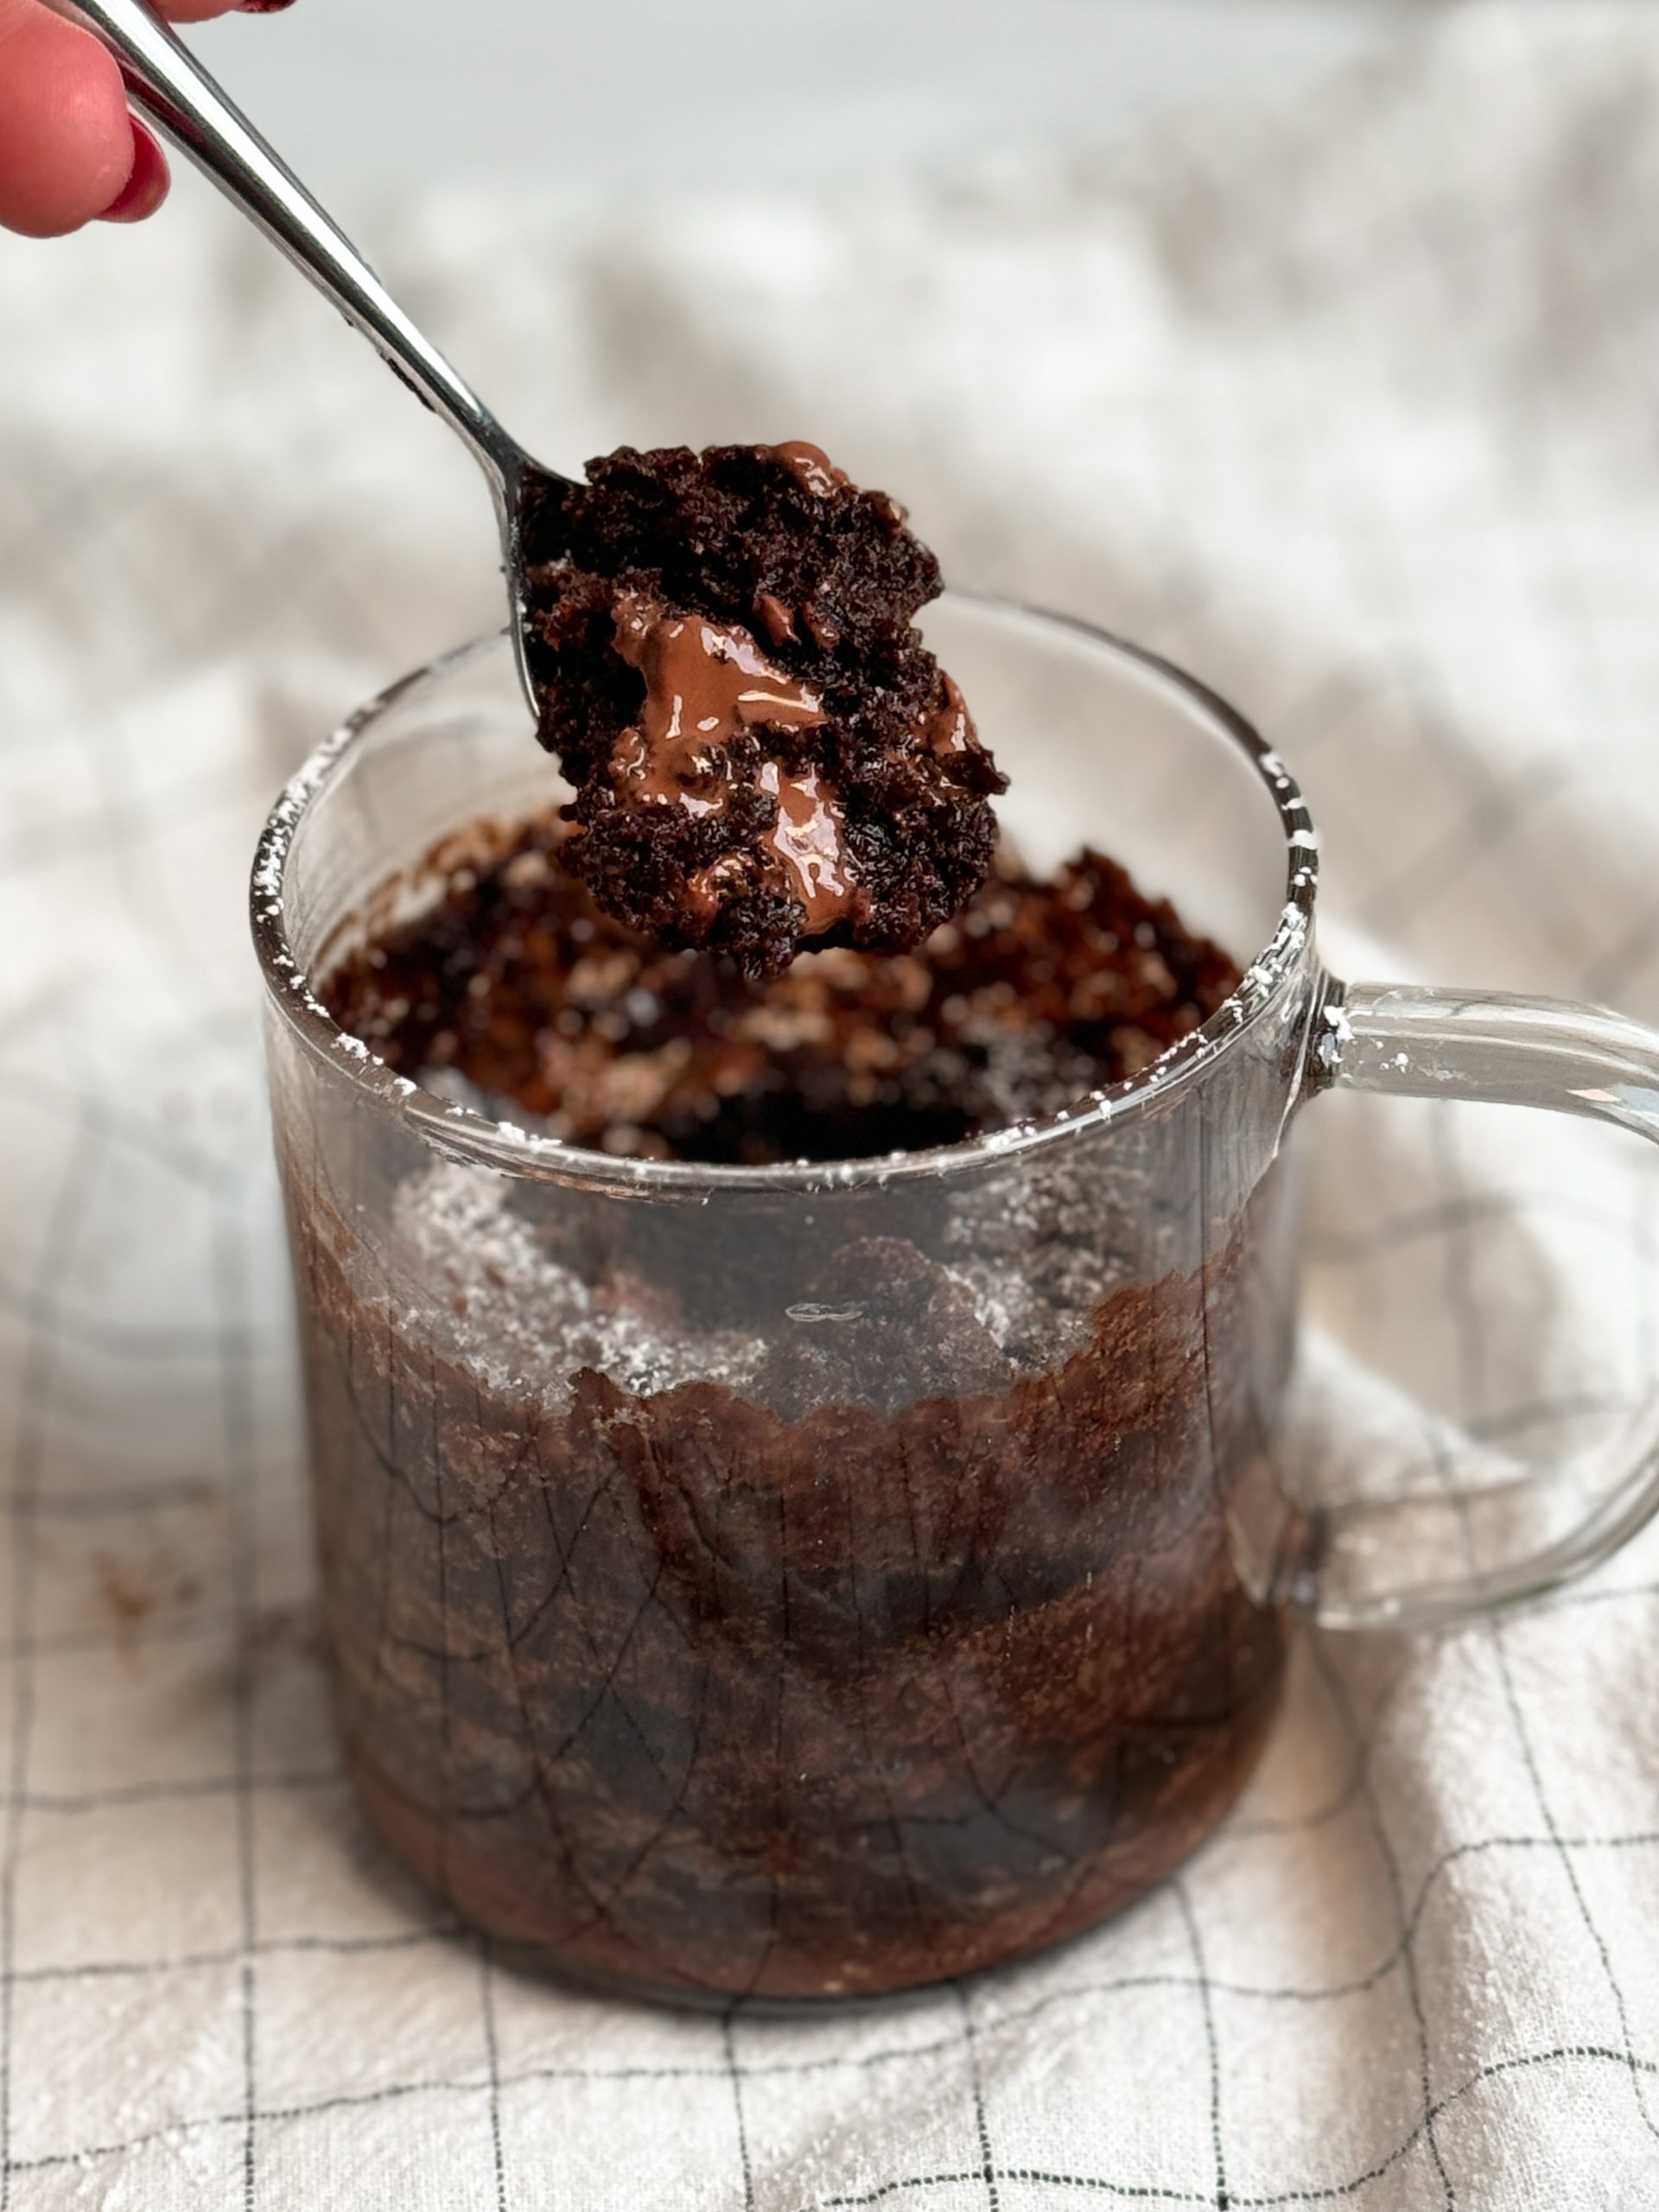 Molten Lava Chocolate Mug cake in a glass mug, with a small spoon taking out a bite revealing moist texture and molten chocolate instead